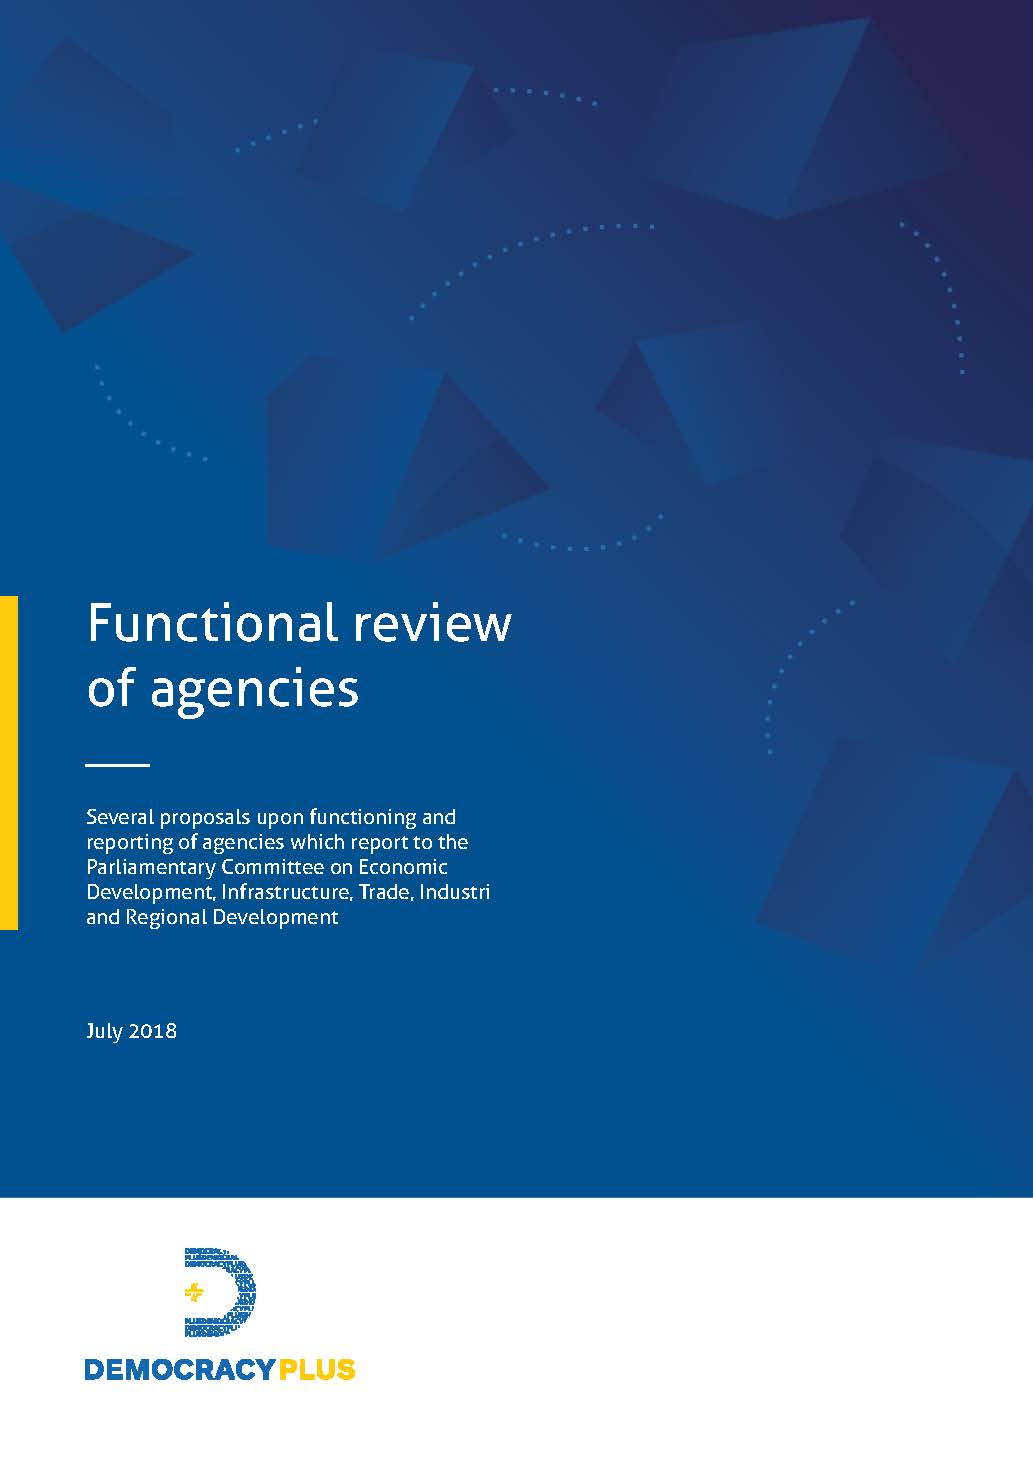 Functional review of agencies